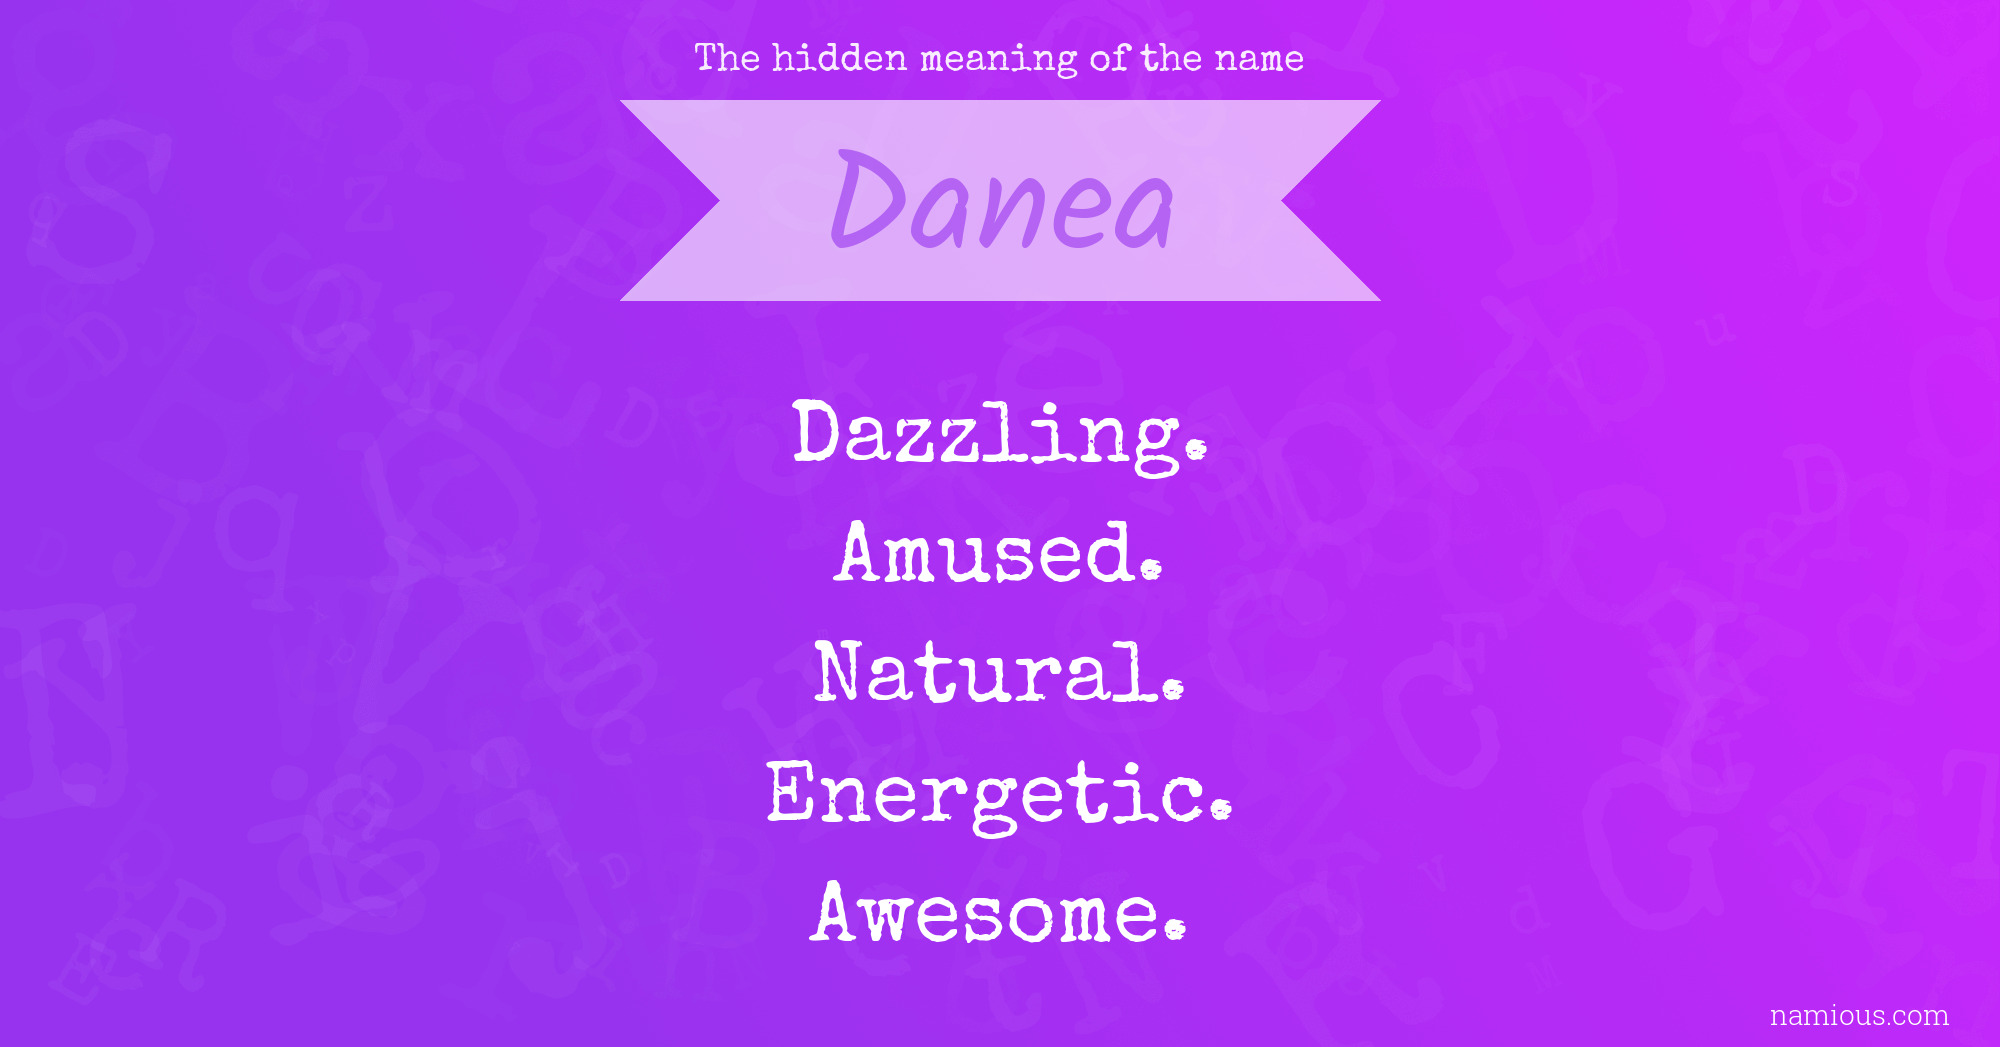 The hidden meaning of the name Danea